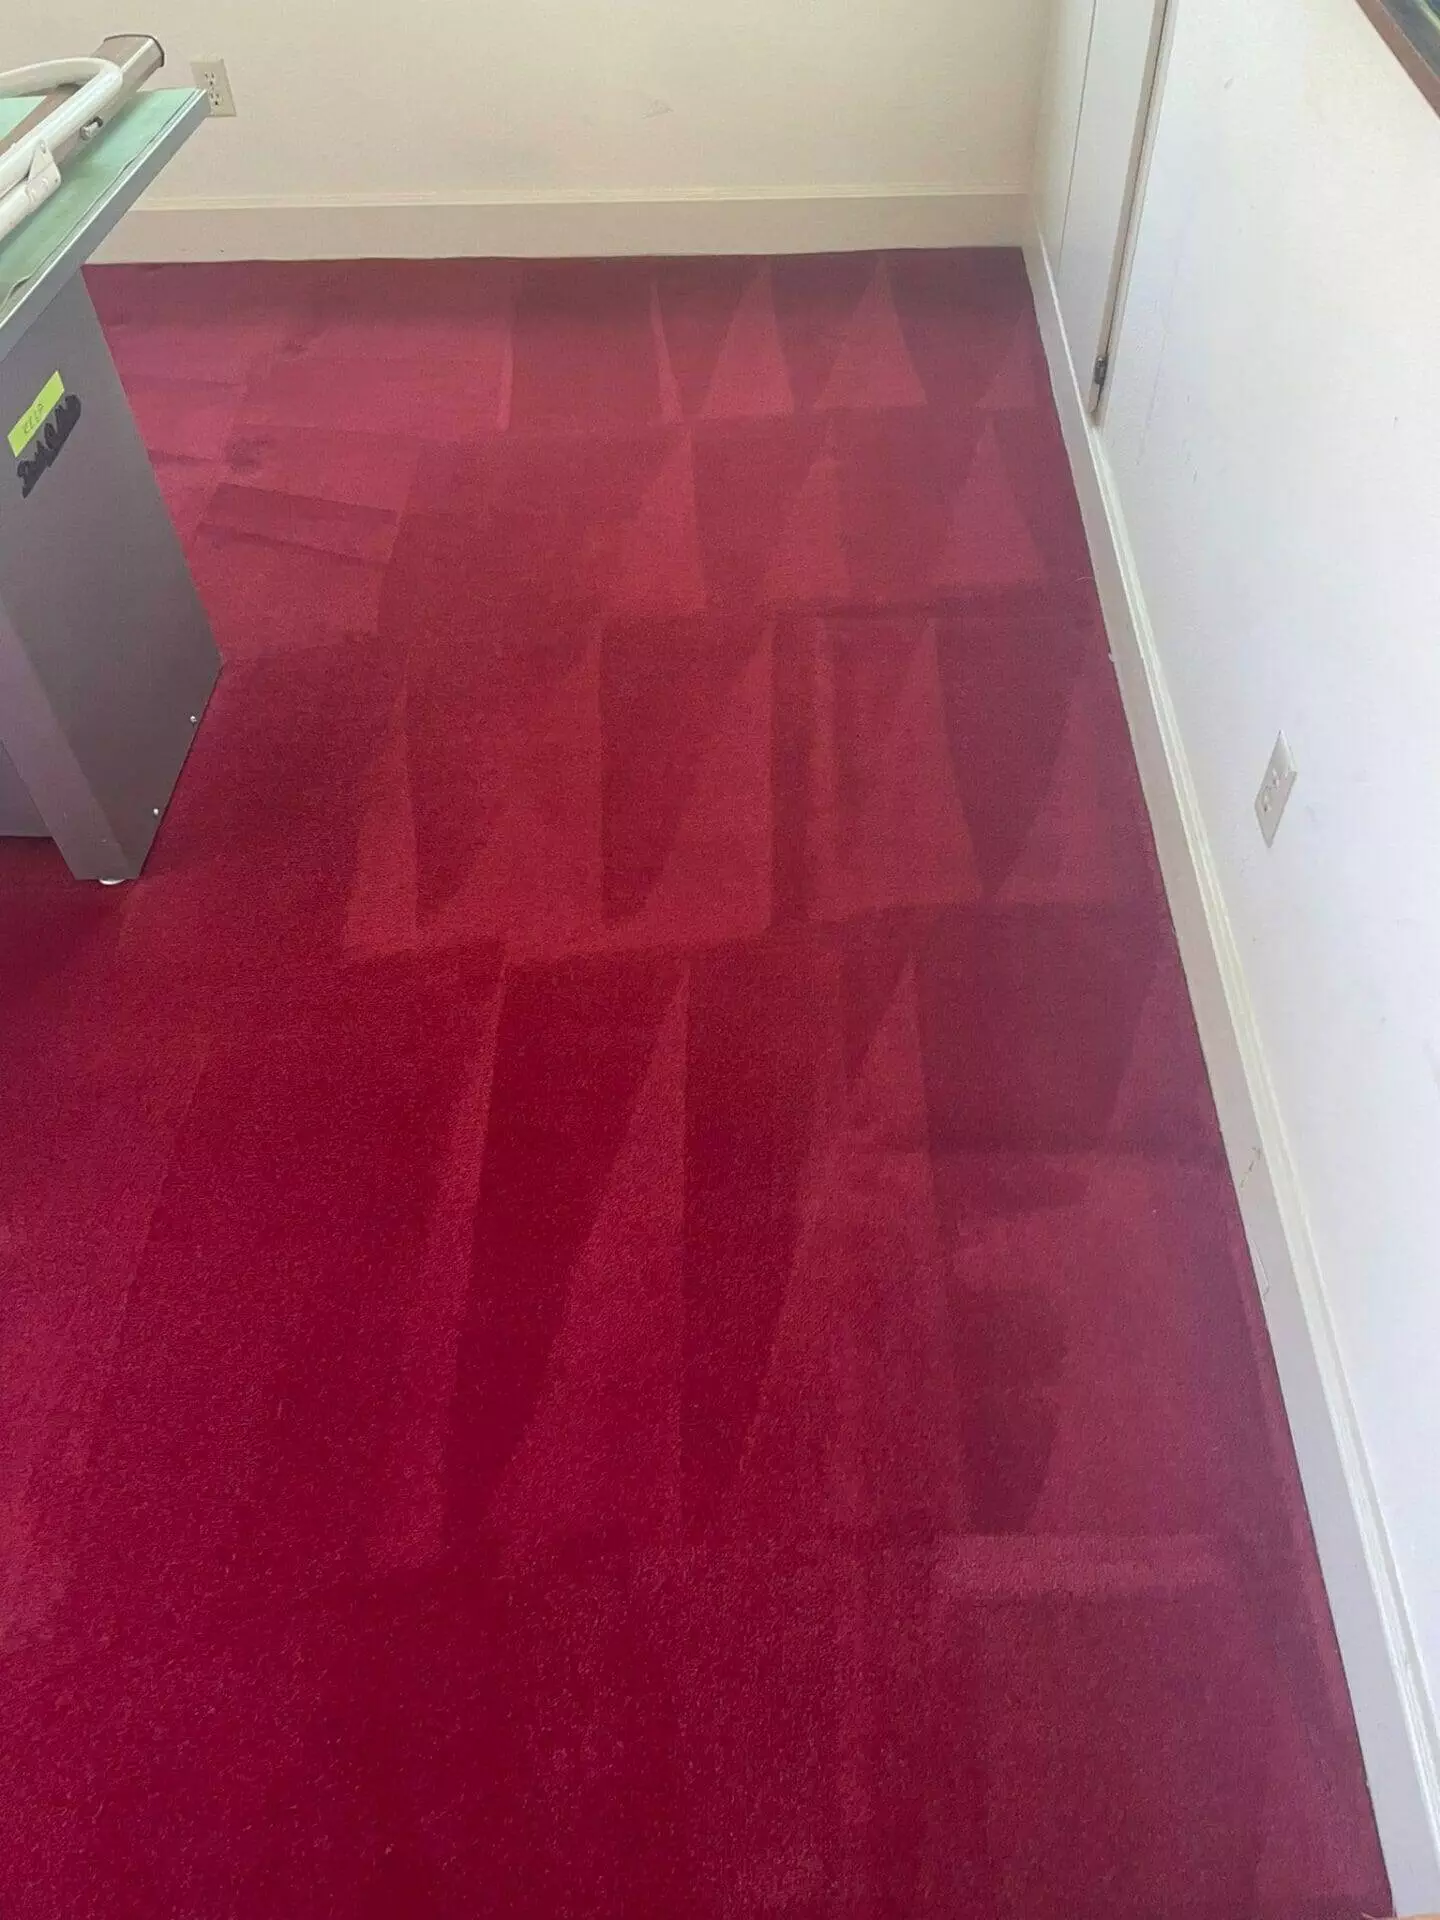 Commercial carpet cleaning in an office.